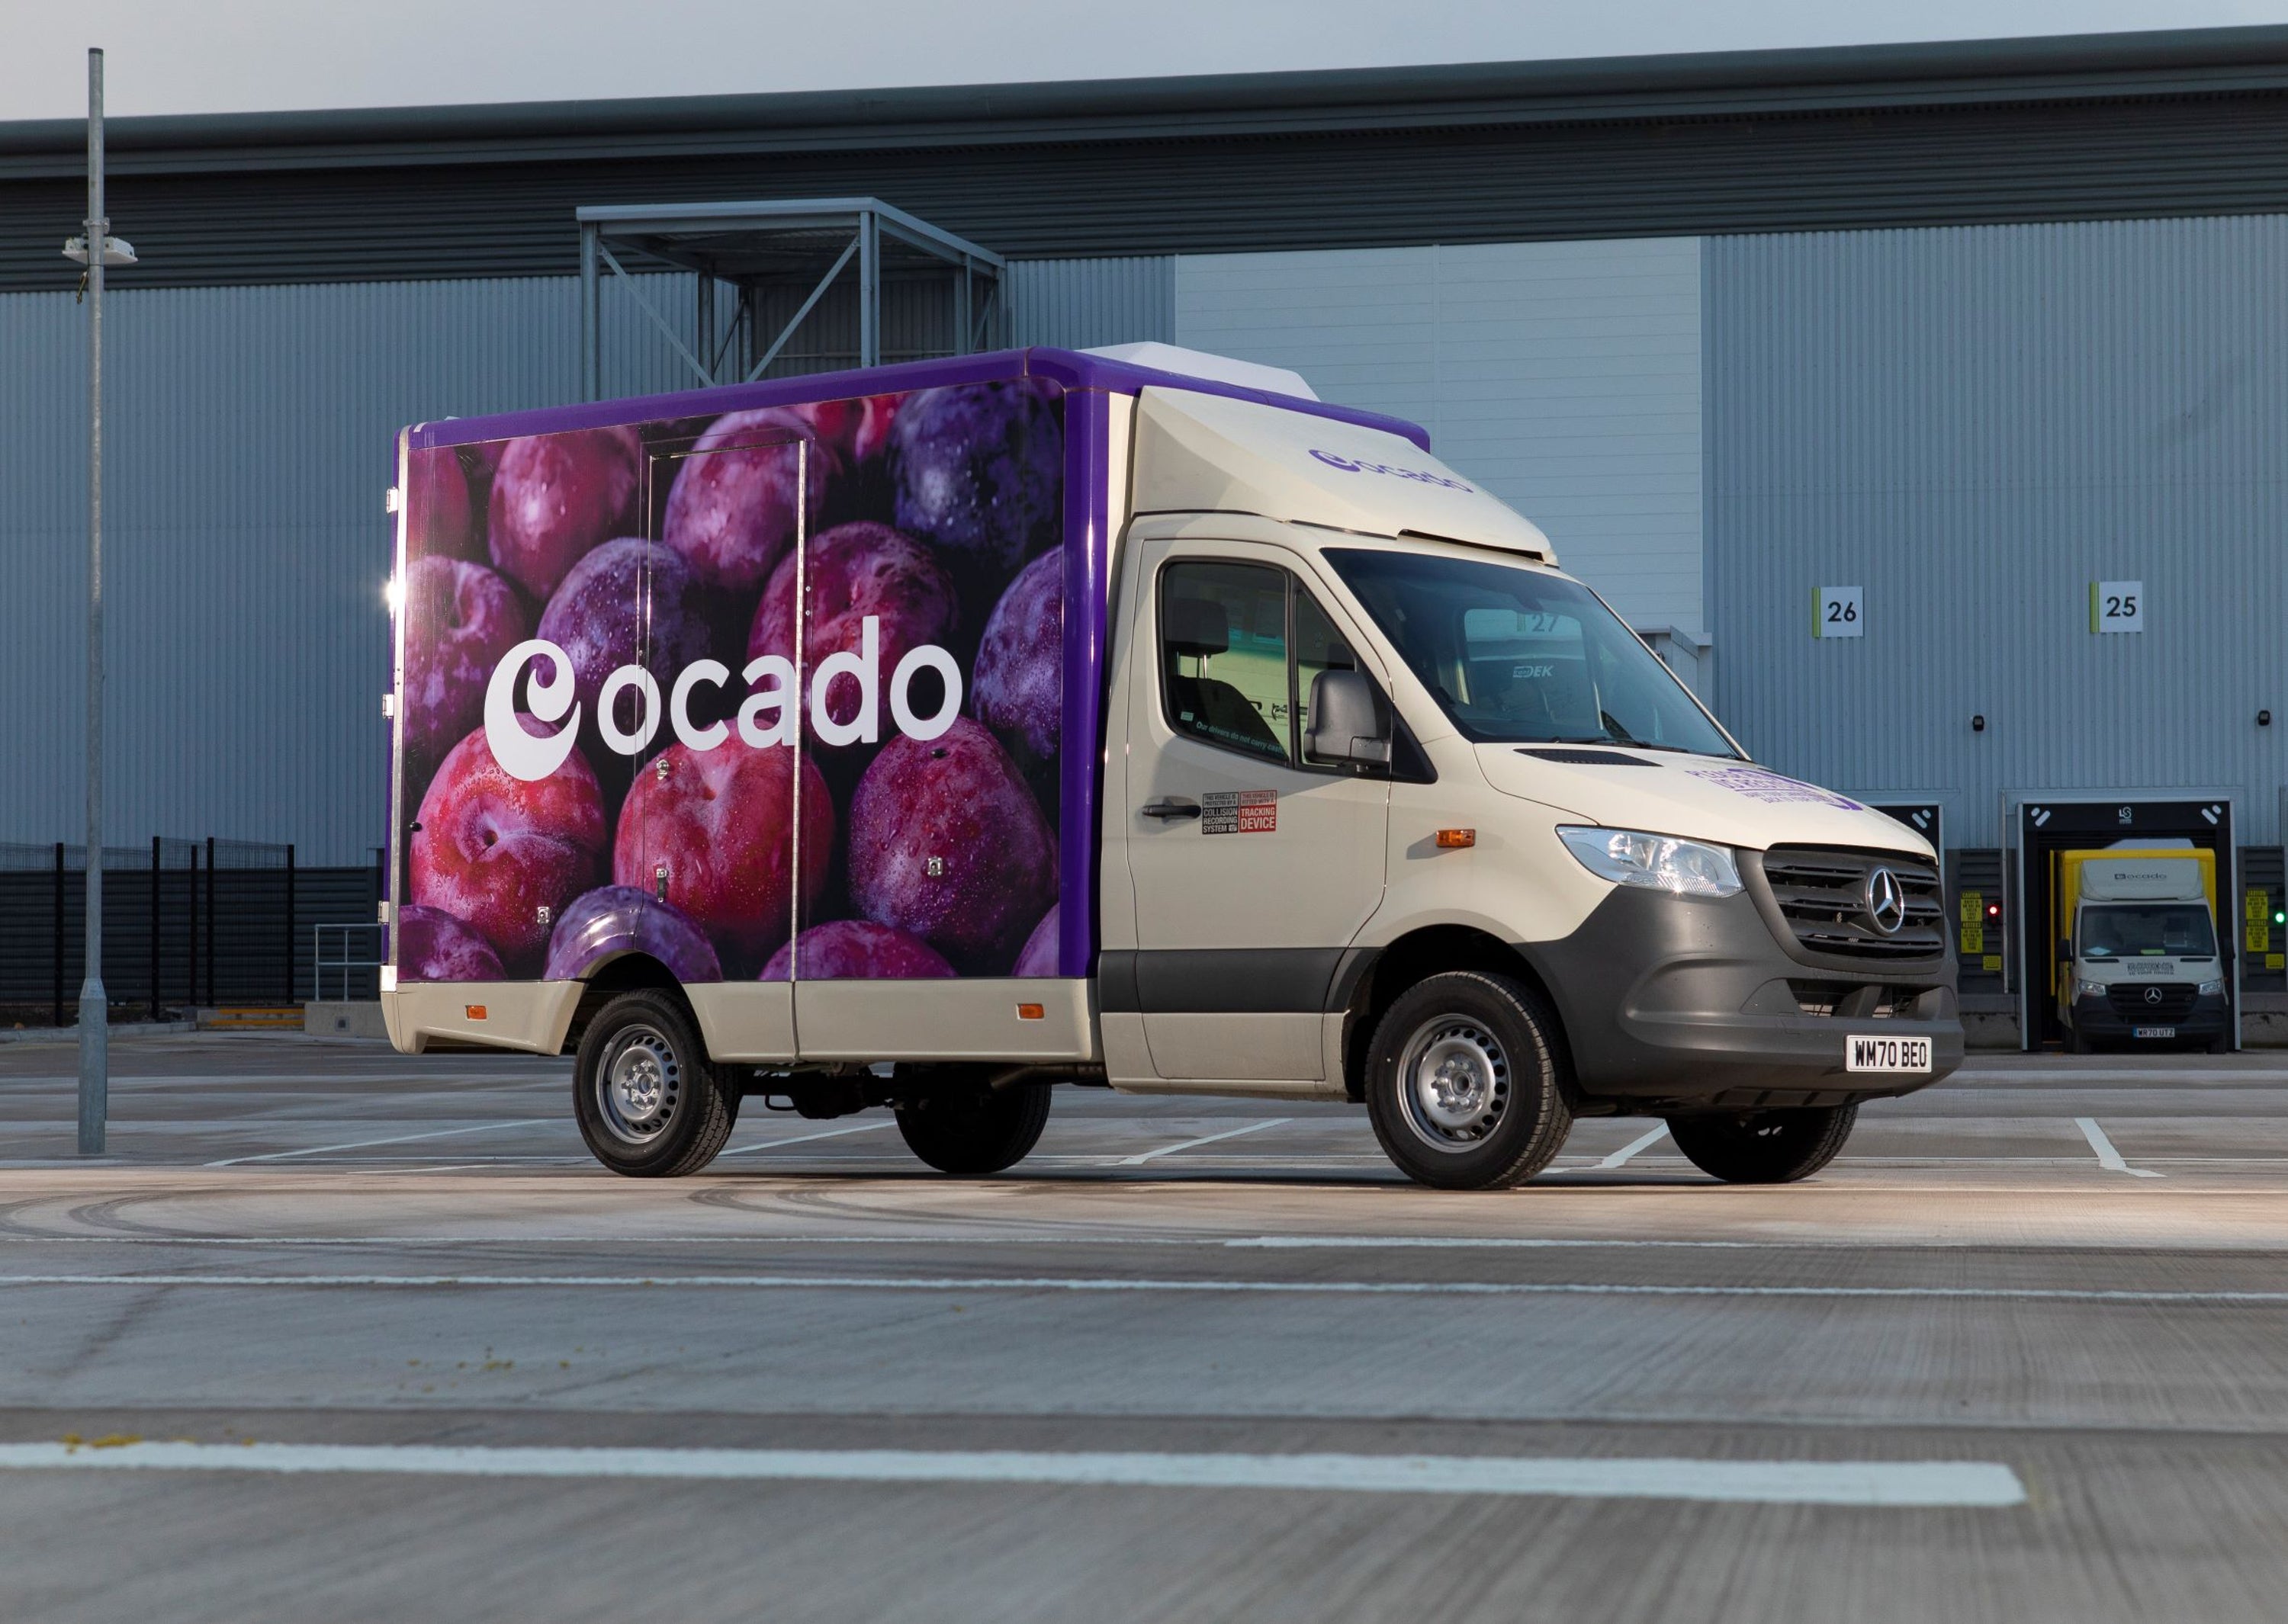 Online grocer Ocado has struck a deal with French partner Groupe Casino for a new logistics joint venture as part of a wider move to expand its offering across France (Ocado/PA)